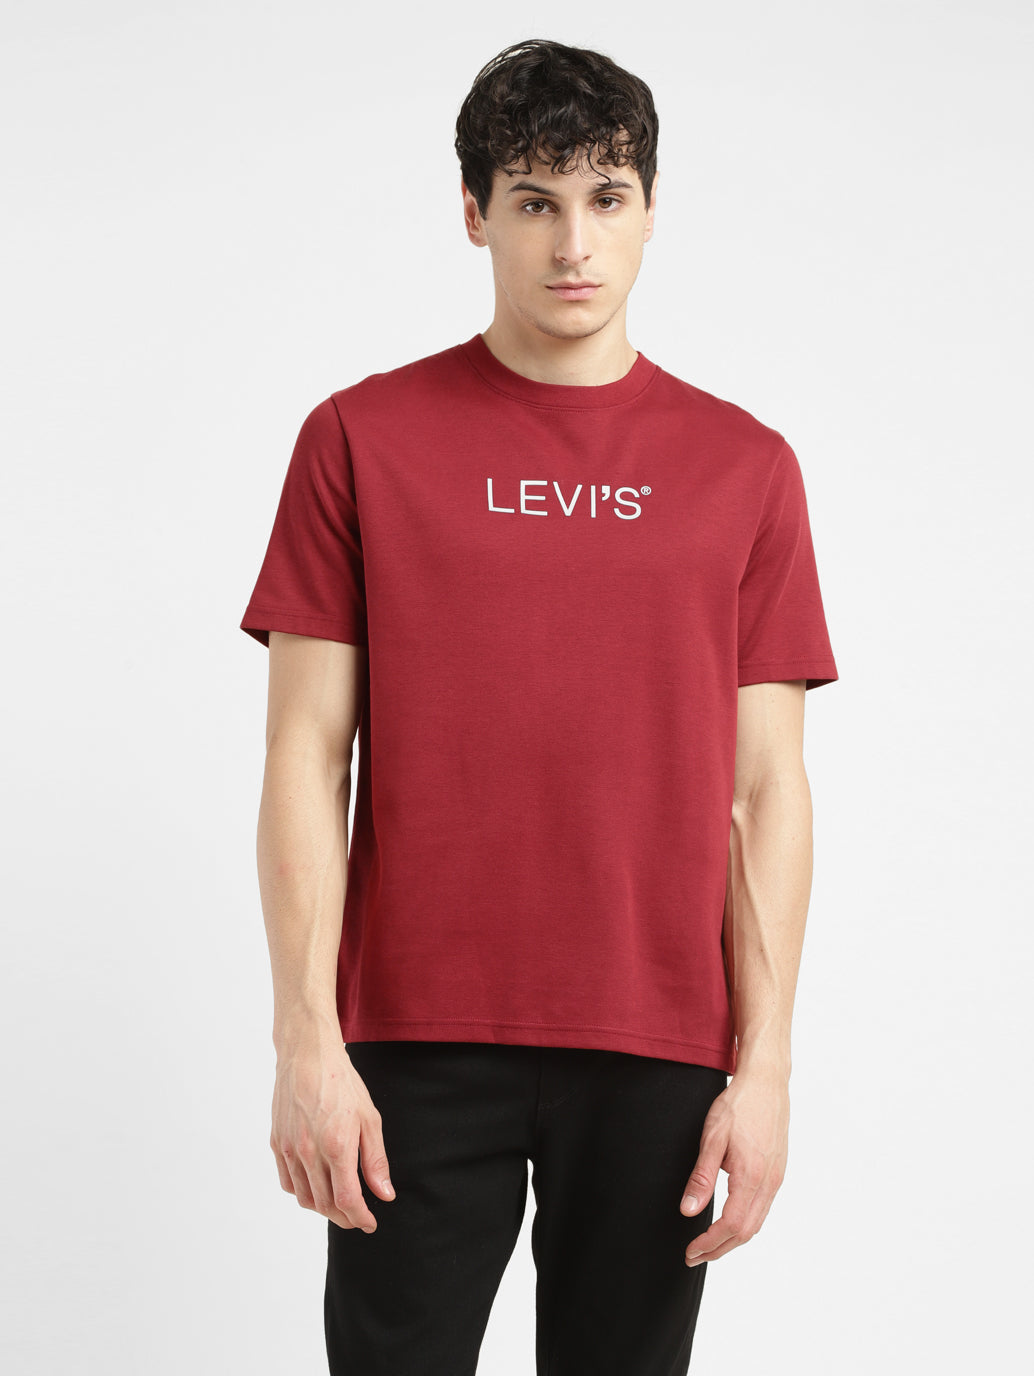 LEVIS ATHL TEE ATH BRANDED 3 SUN DRIED TOMATO A7897-0005 T-SHIRT SHORT SLEEVE (M)